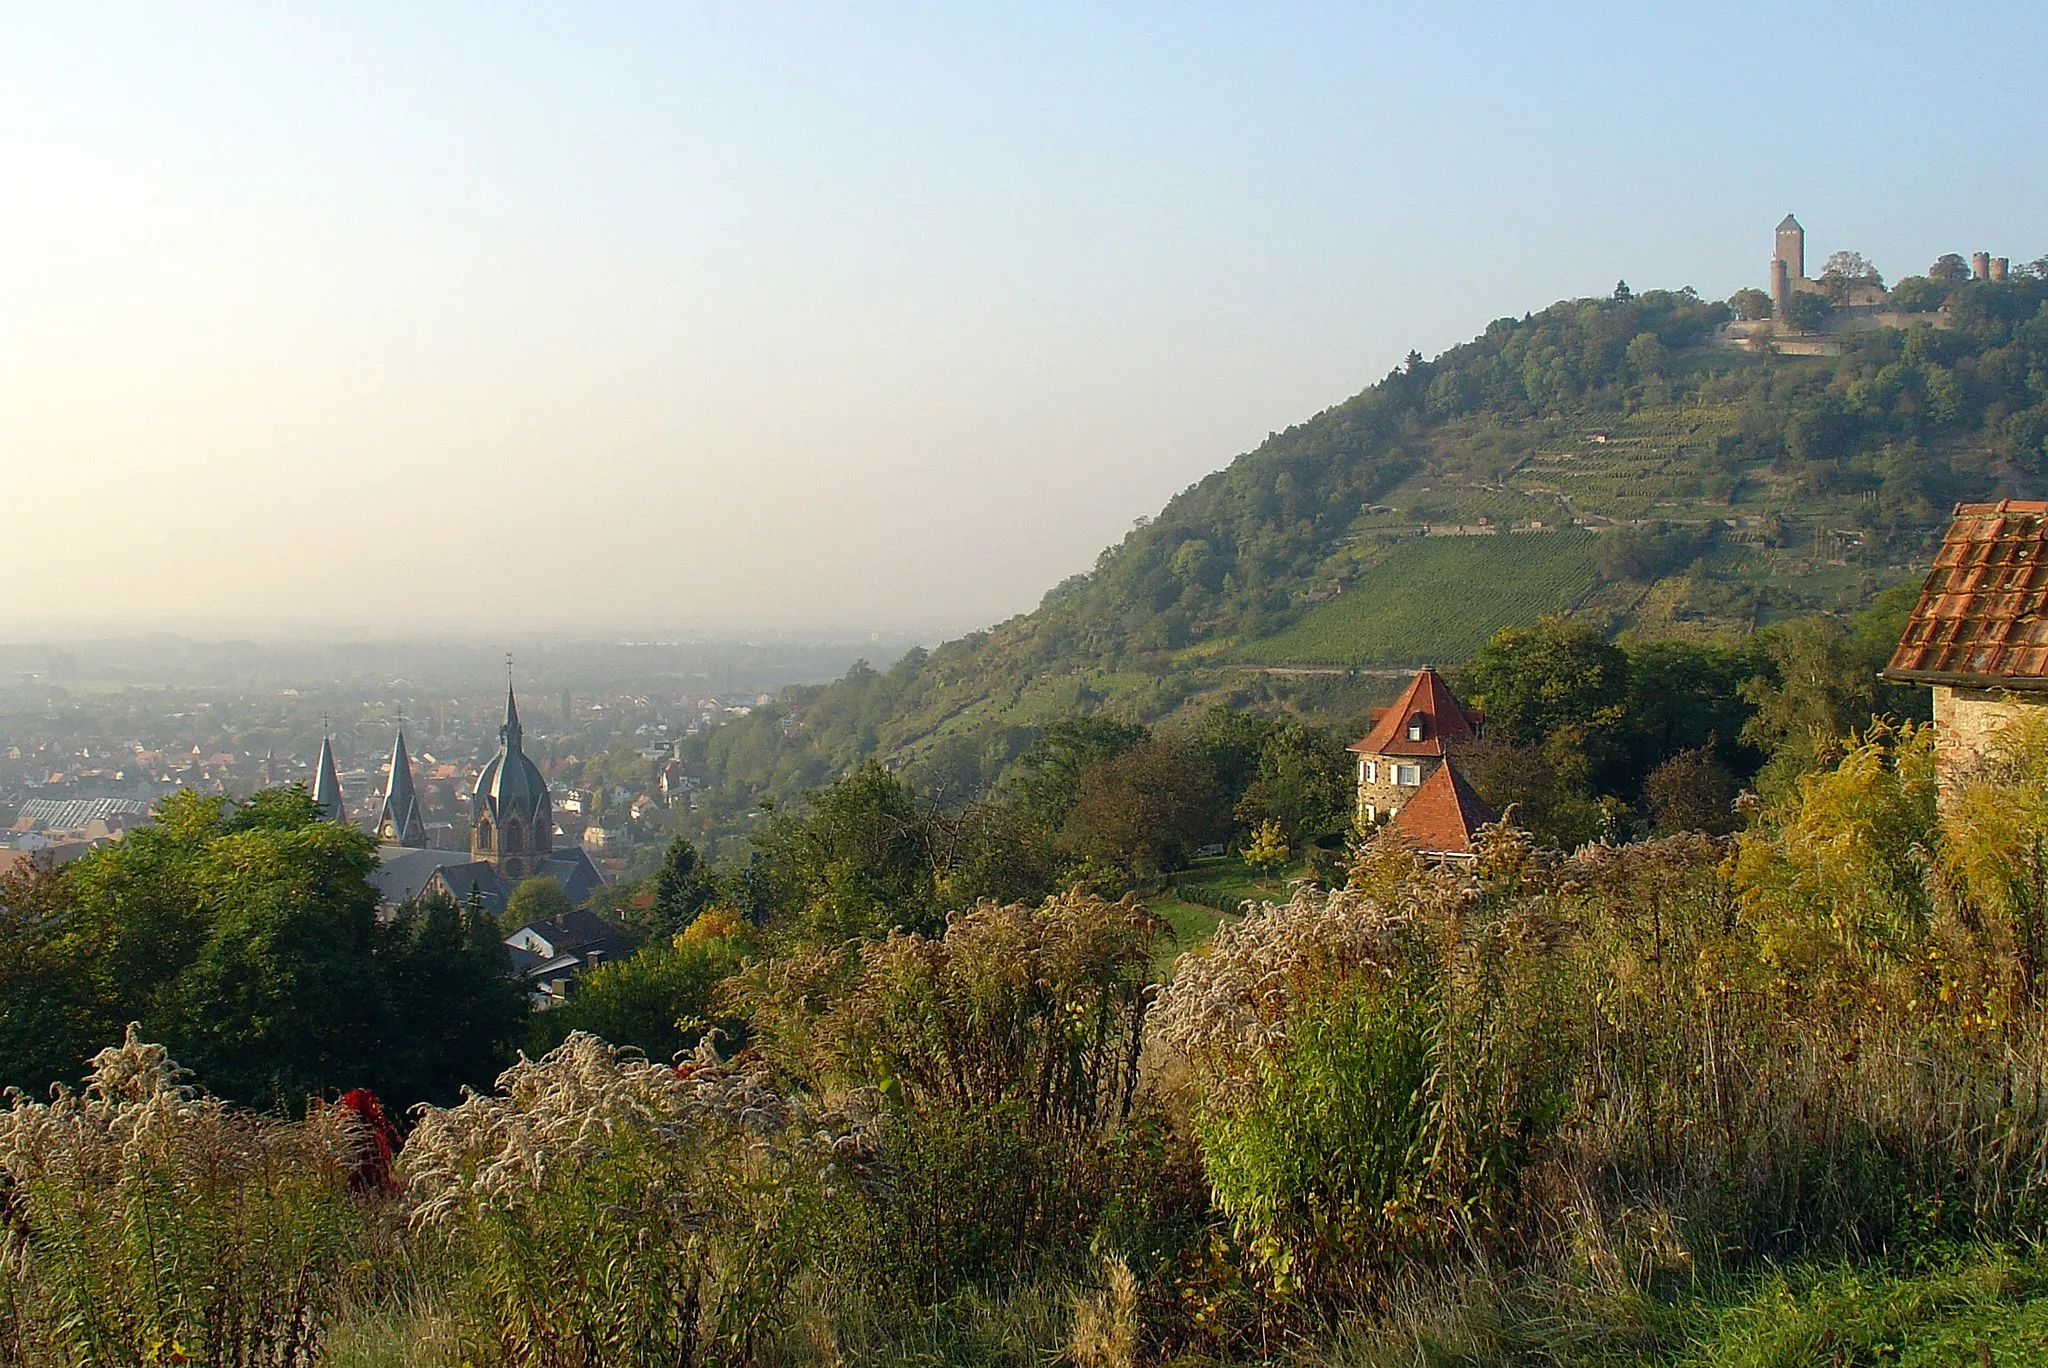 Photo showing: Heppenheim, Germany
Photographer: Marco Mayer

Picture taken: October 13th, 2005